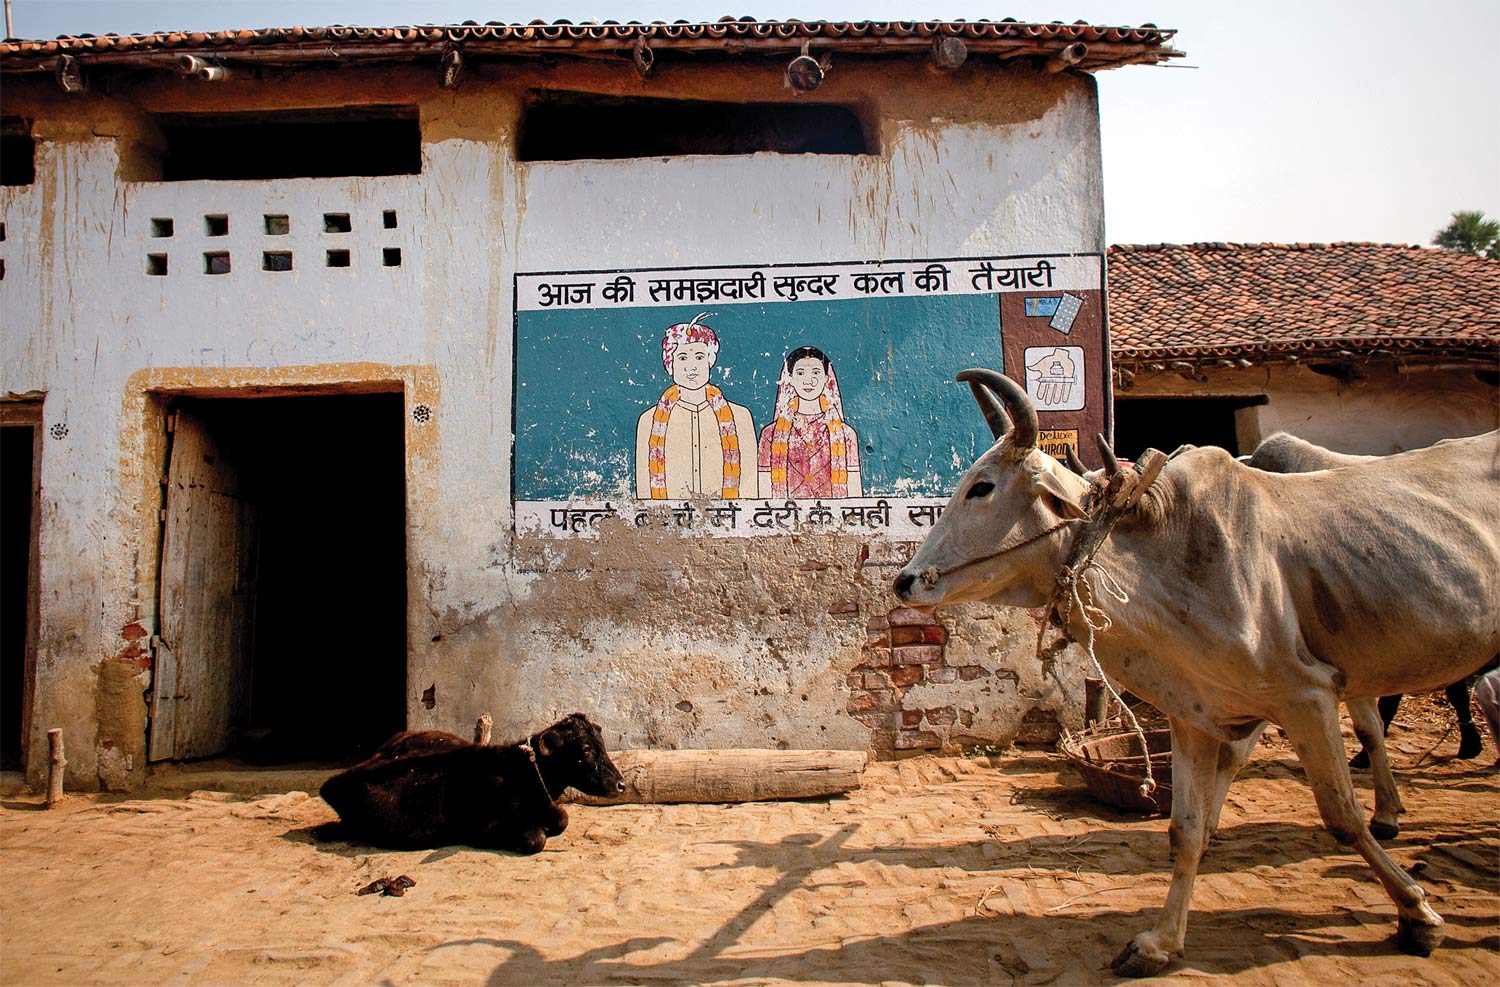 A Pathfinder mural advertising the benefits of family planning and reproductive health, in the village of Kazarshoth, 2013.